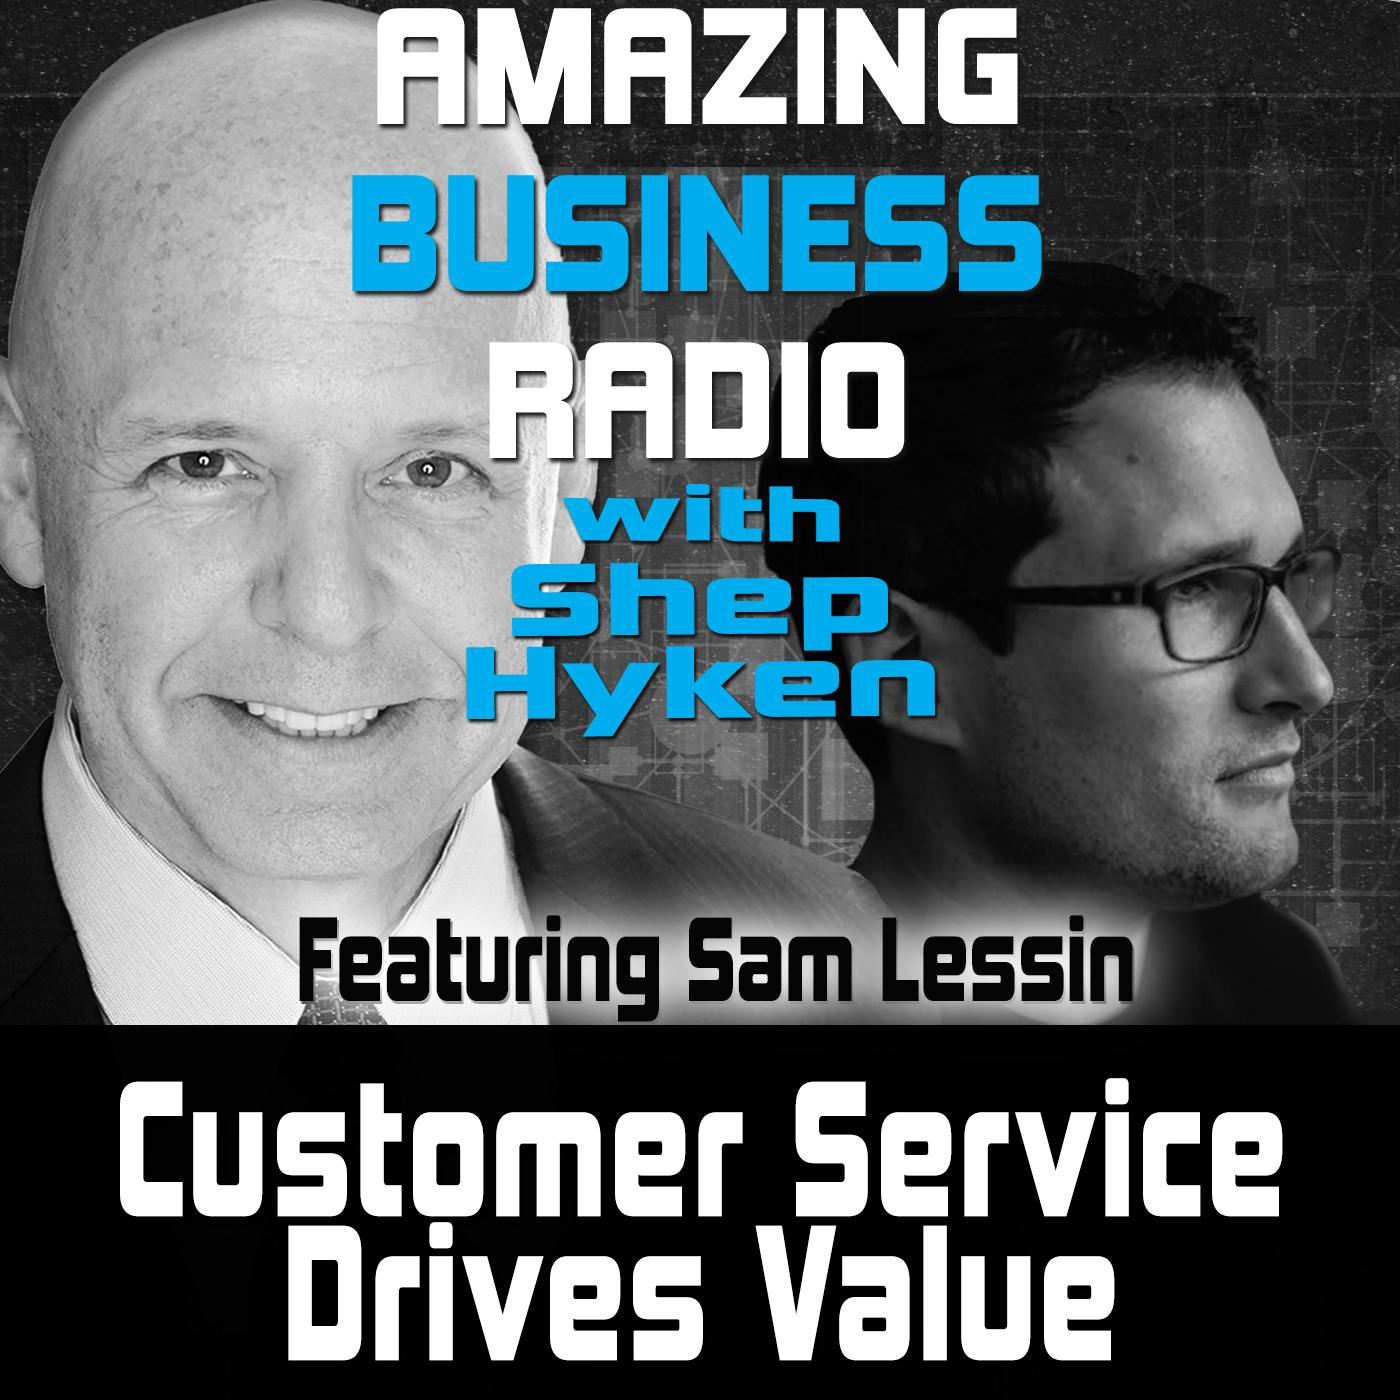 Customer Service Drives Value Featuring Guest Sam Lessin